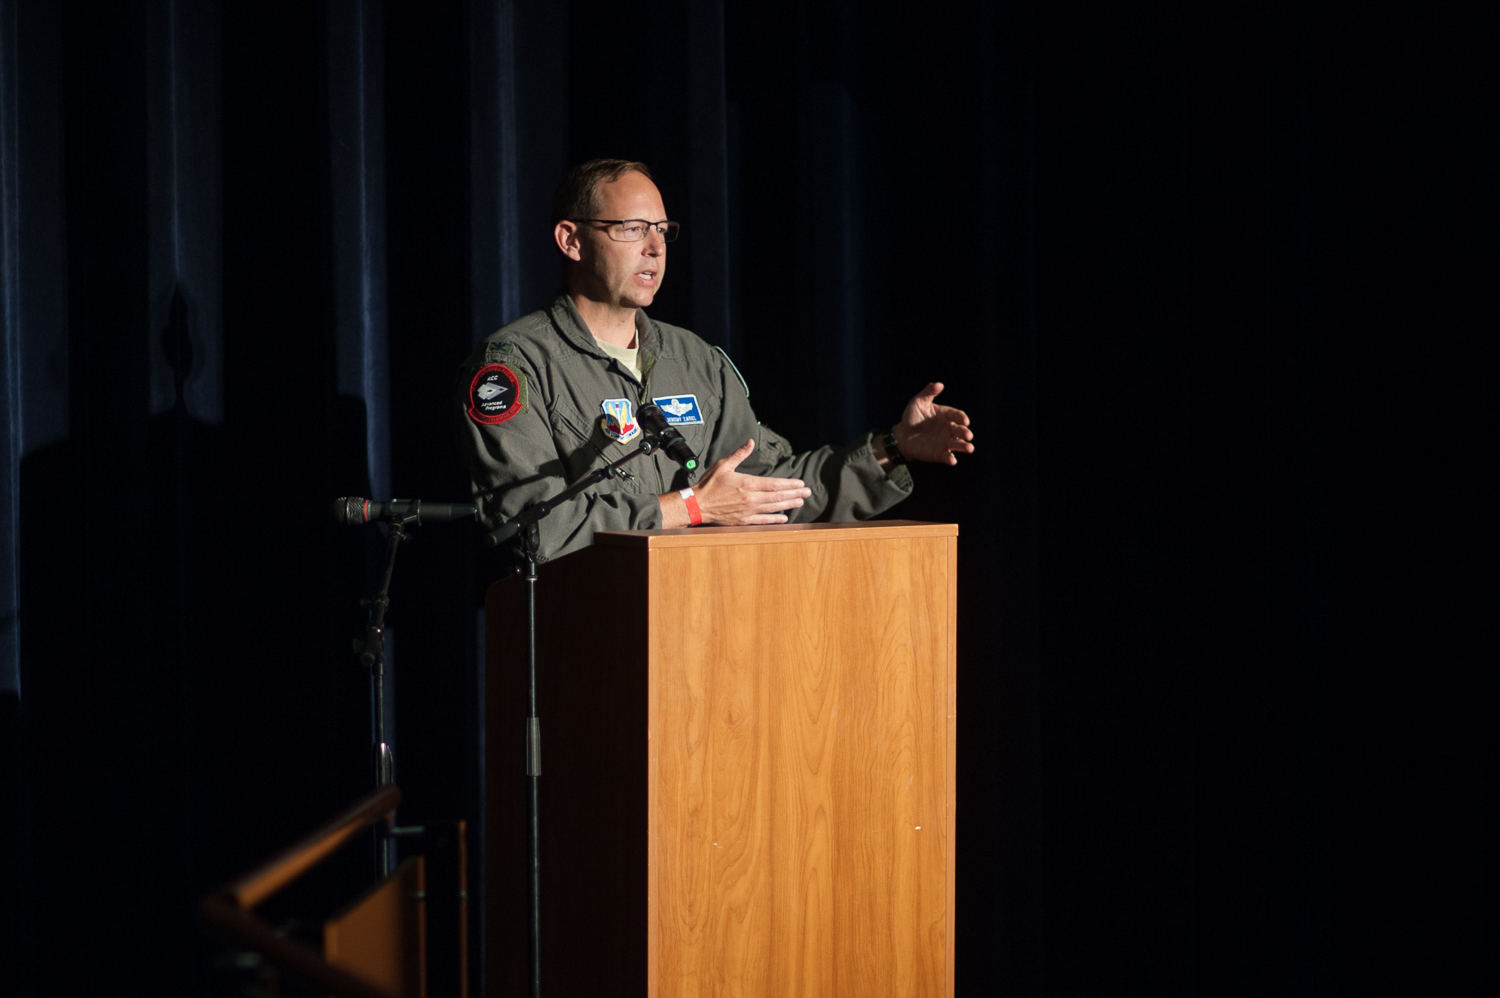 Air Force Col. Jeremy Zadel speaking at a podium during Palomar College Drone-Con 2018.